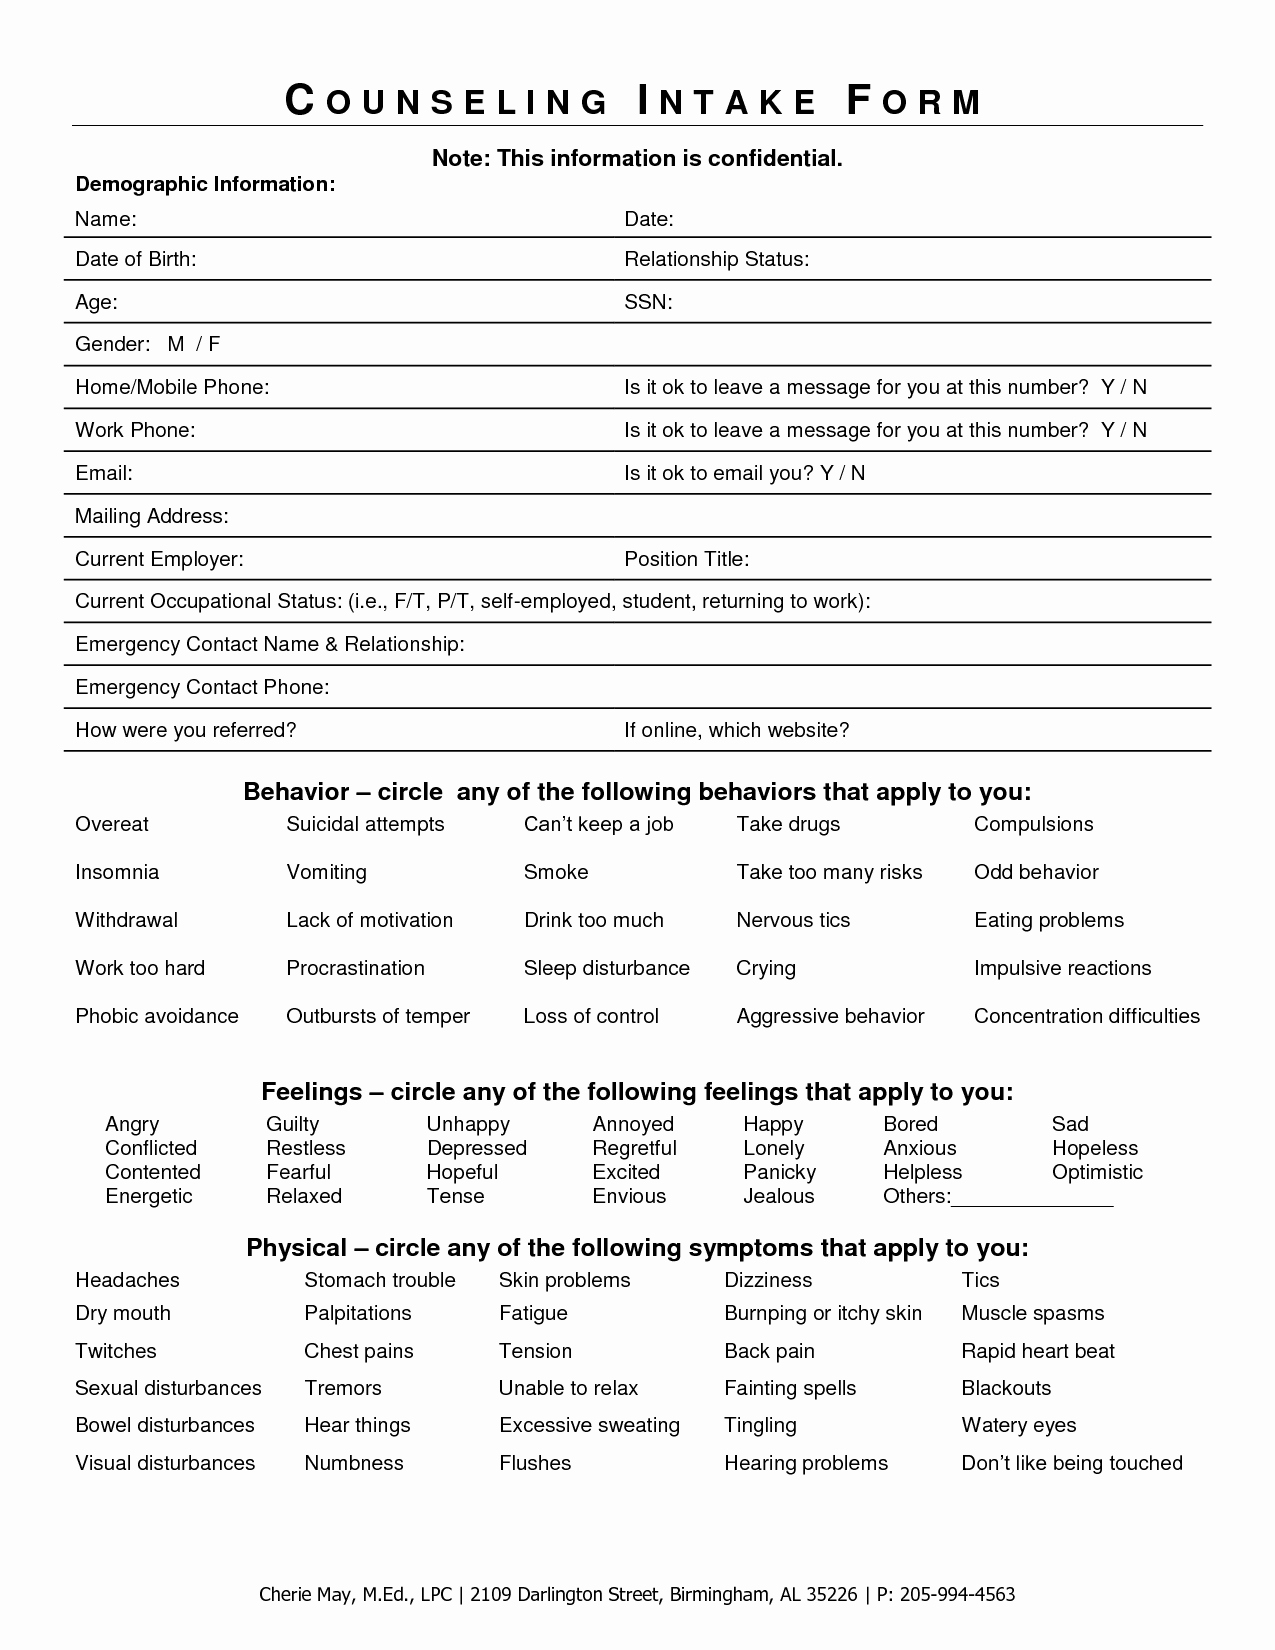 Mental Health Intake form Template Luxury Intake form for Counseling Clients Google Search